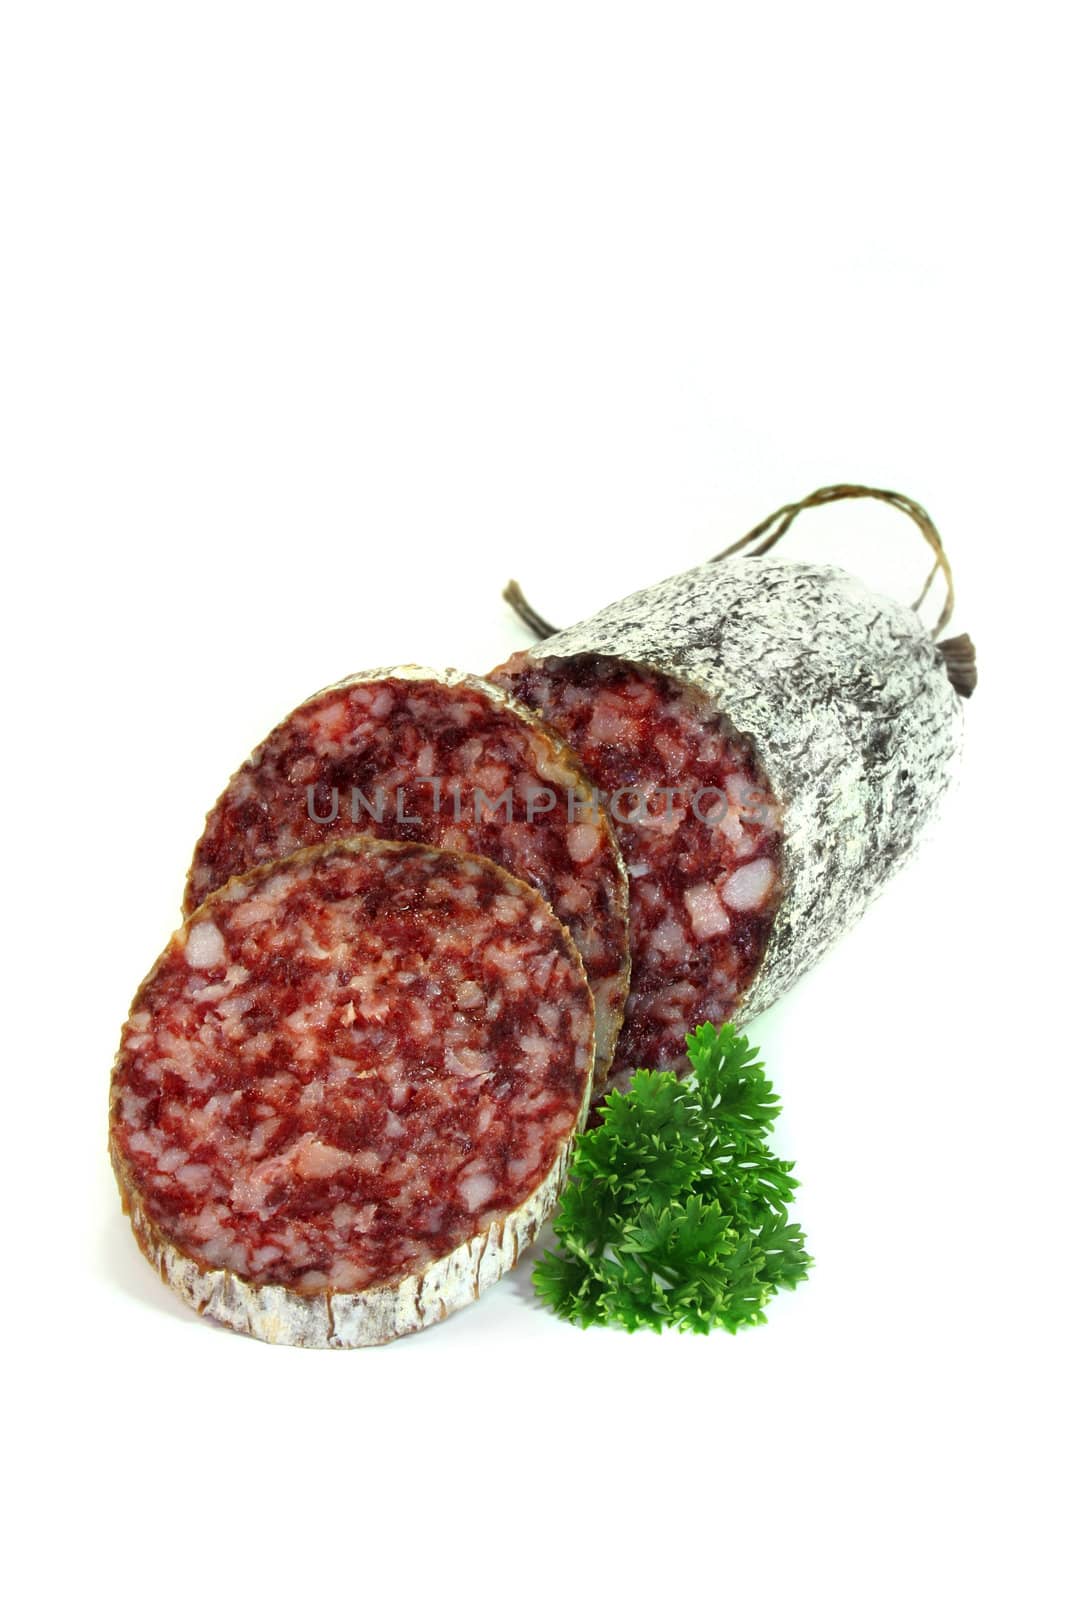 Salami and parsley on a white background